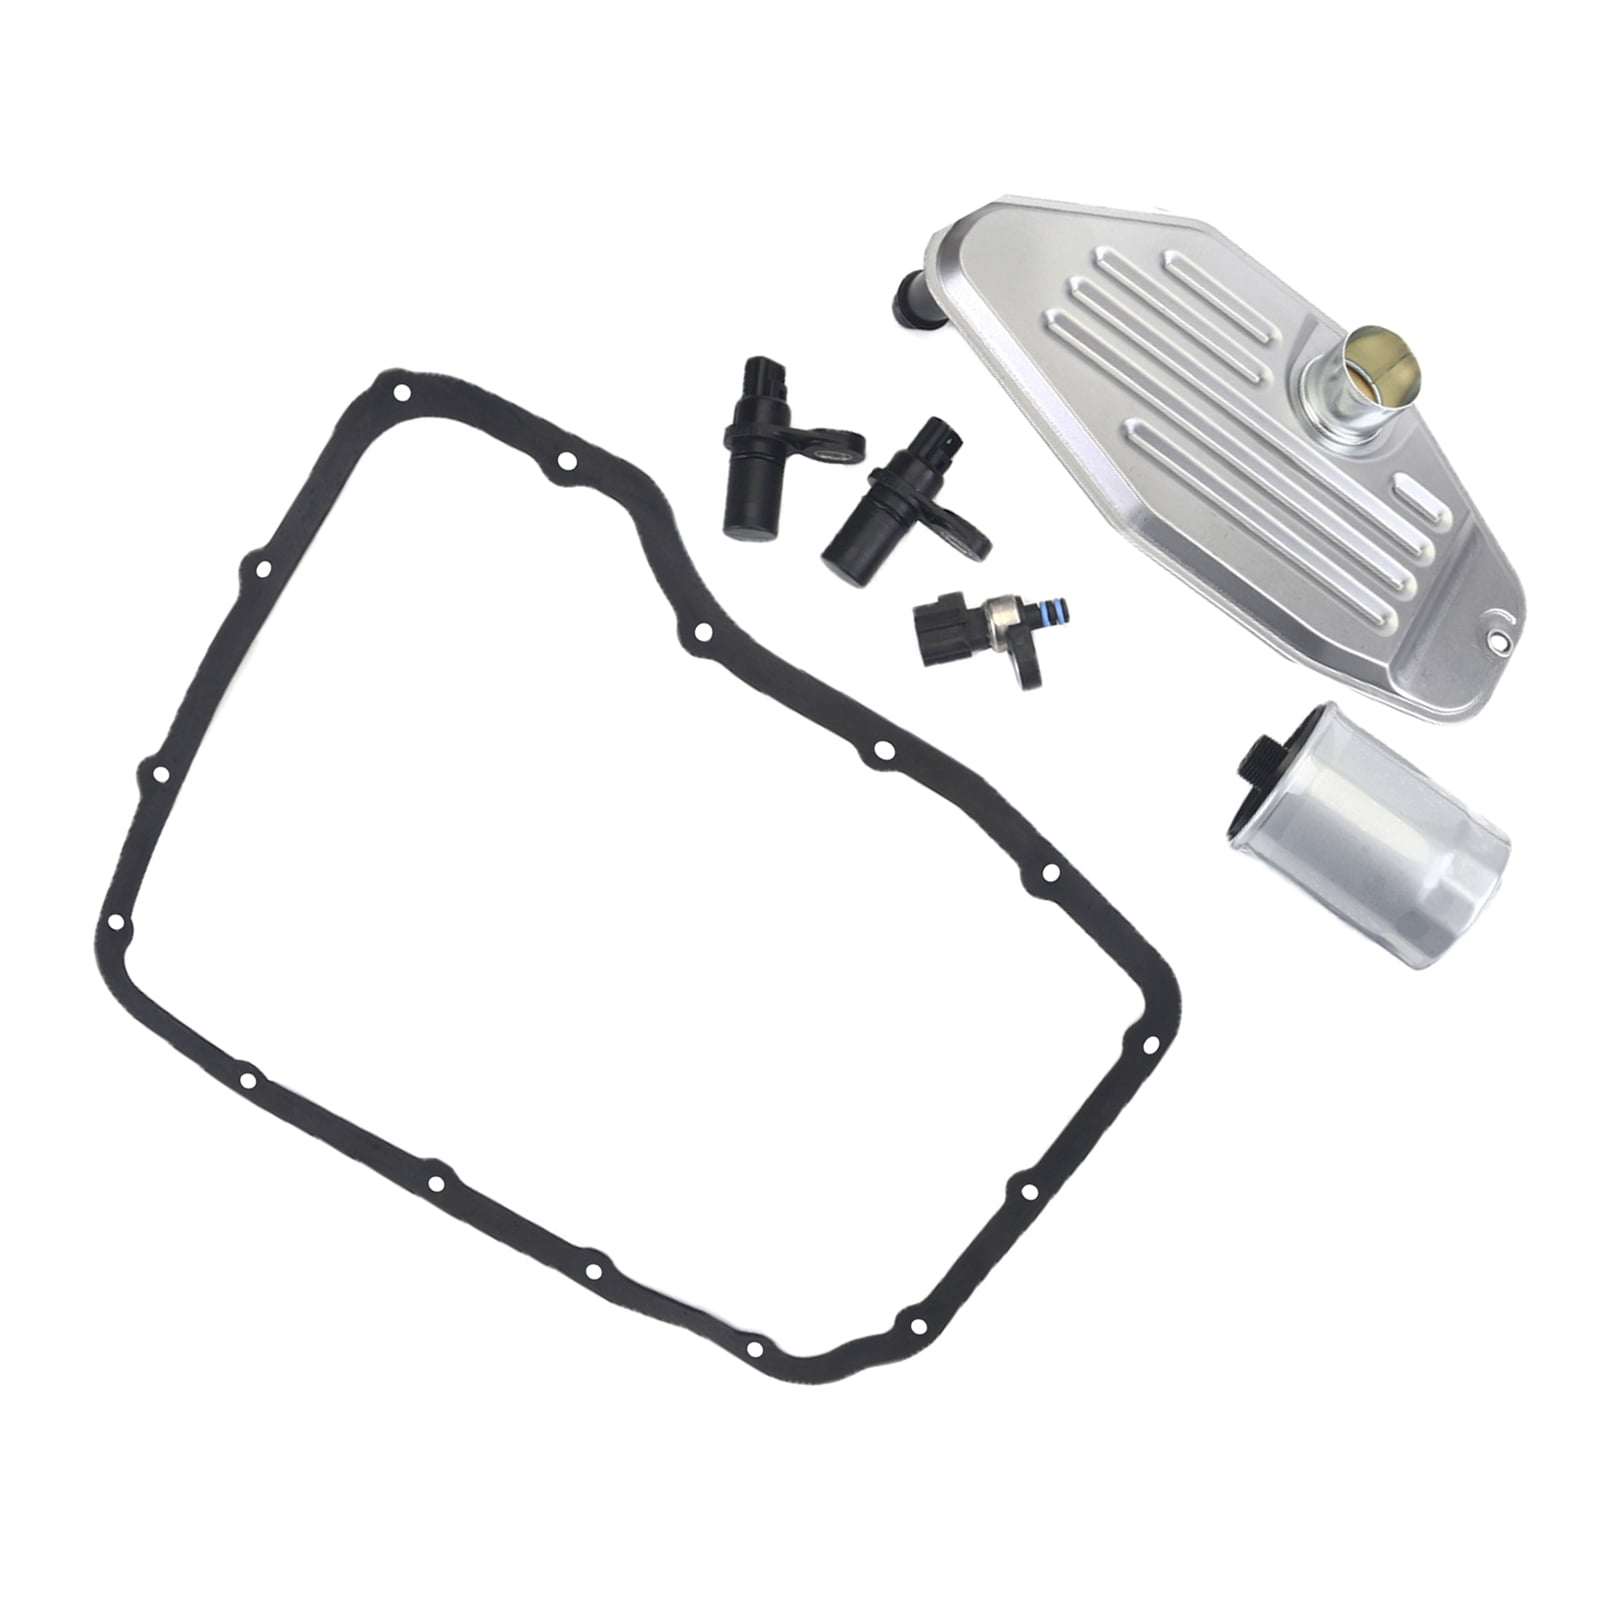 45RFE 545RFE 68RFE Transmission Filter with Gasket and Sensors Kit Compatible with Dodge Ram Jeep 